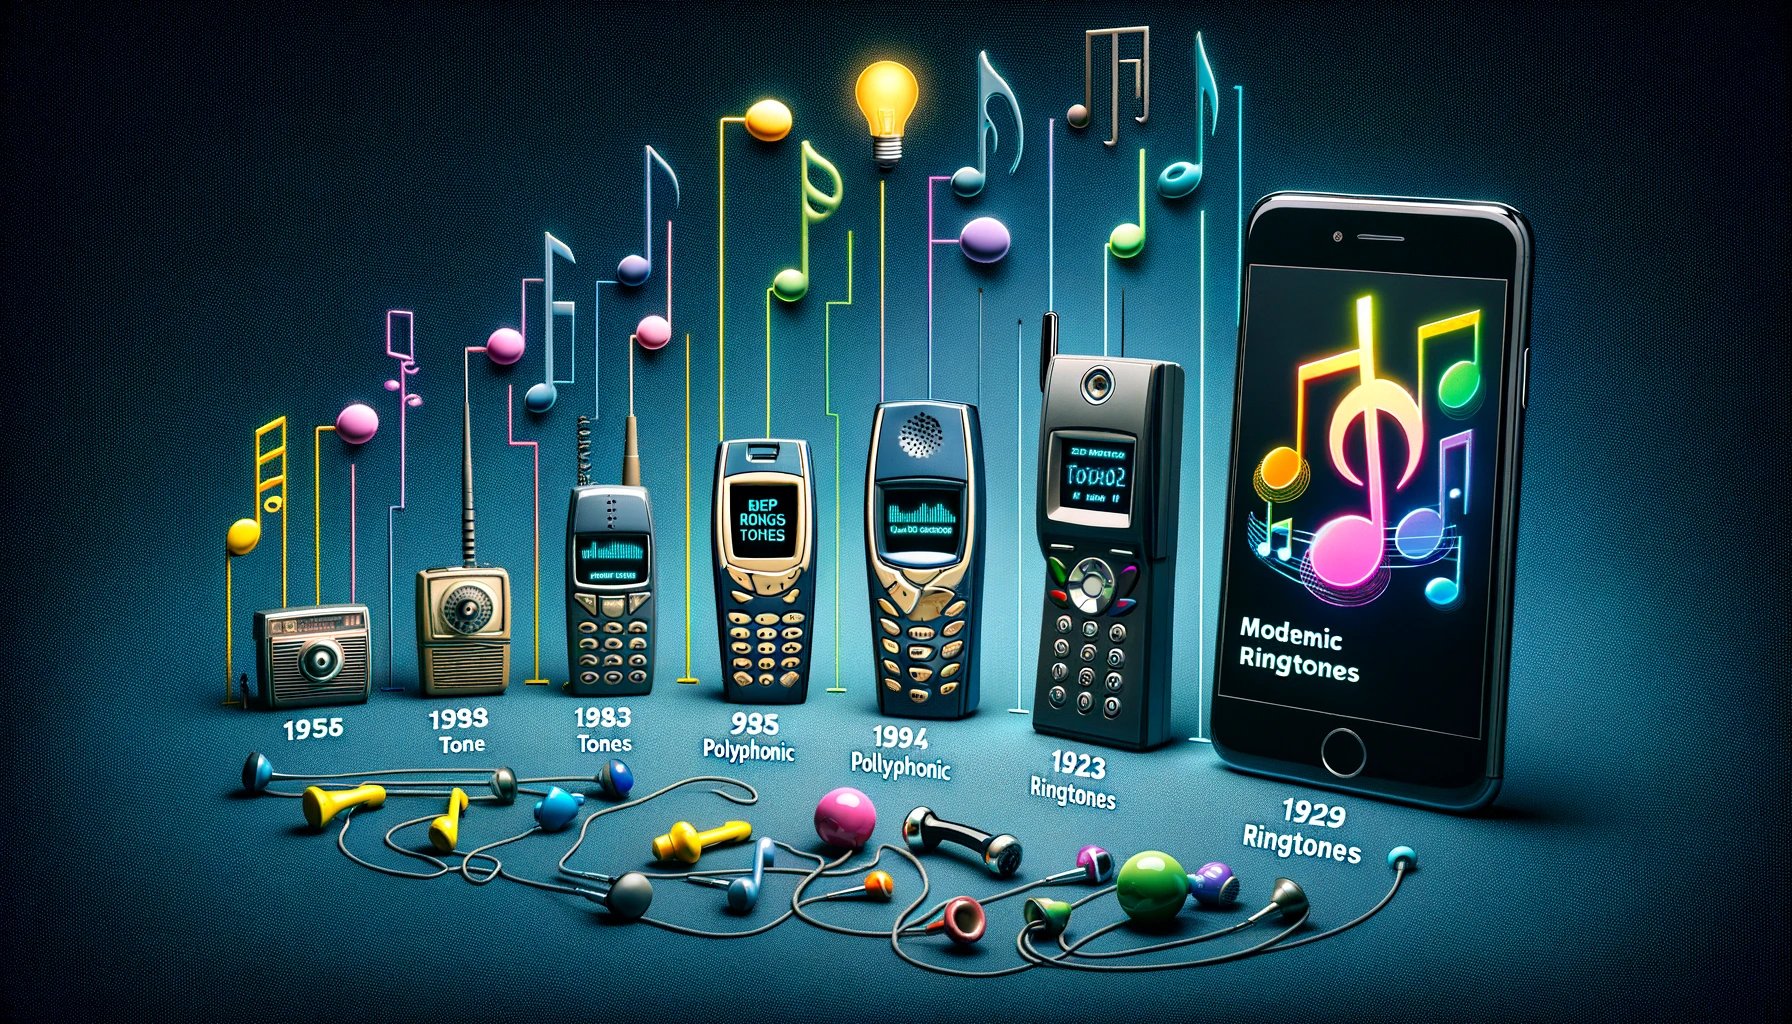  The Evolution of Ringtones: From Simple Beeps to Personalized Melodies